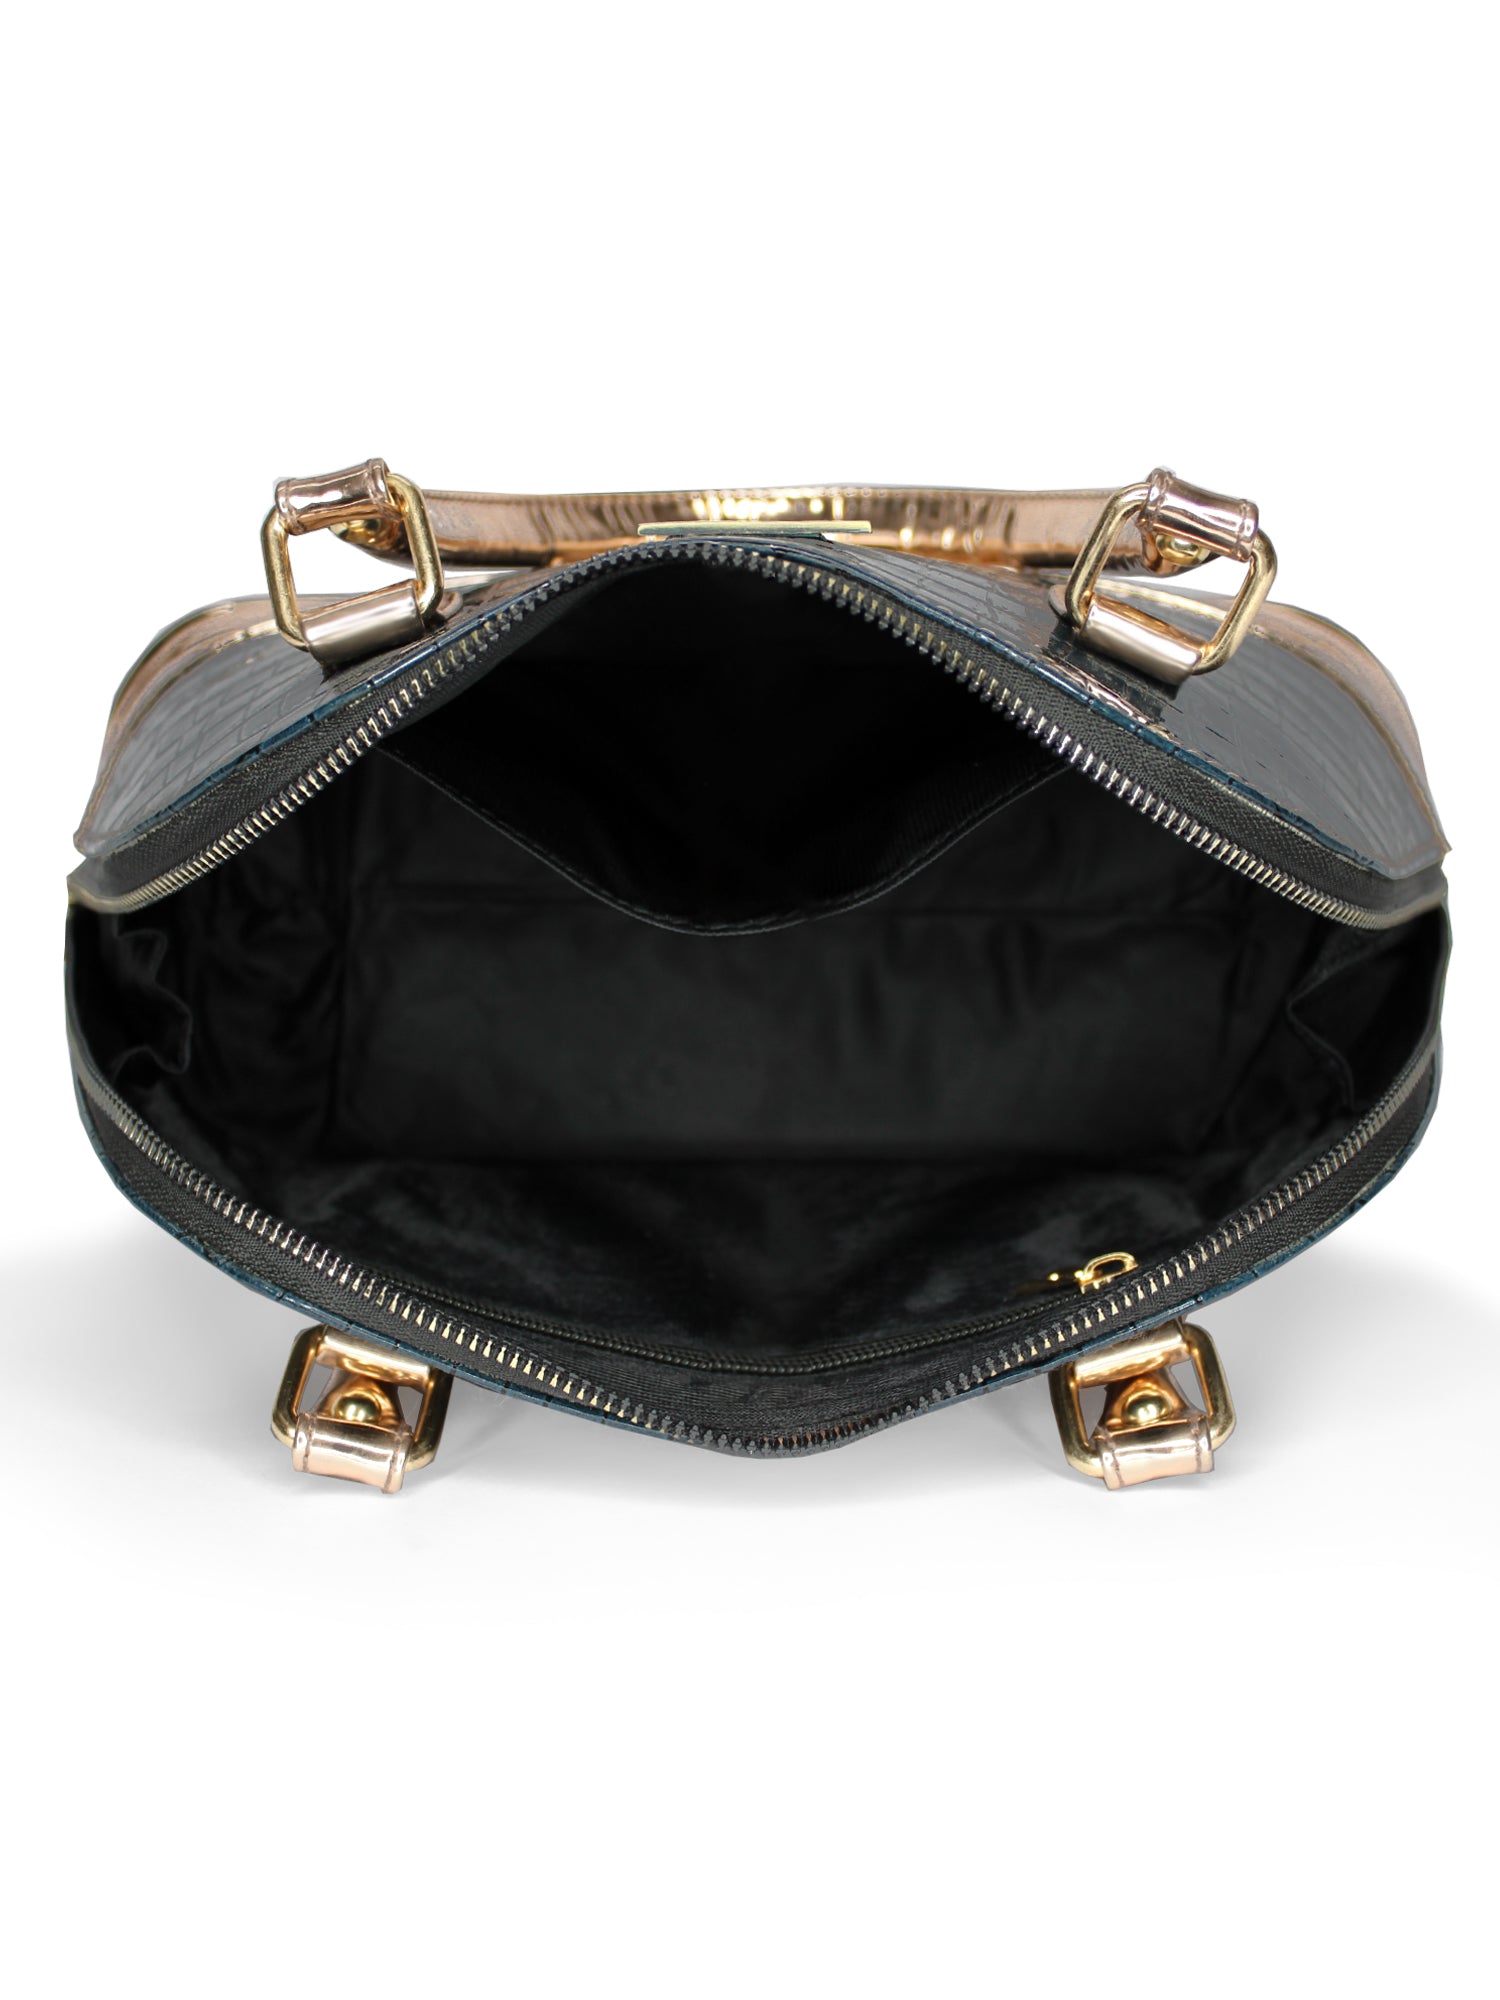 Albert Tusk | The Transport Tote | Leather Tote for Women